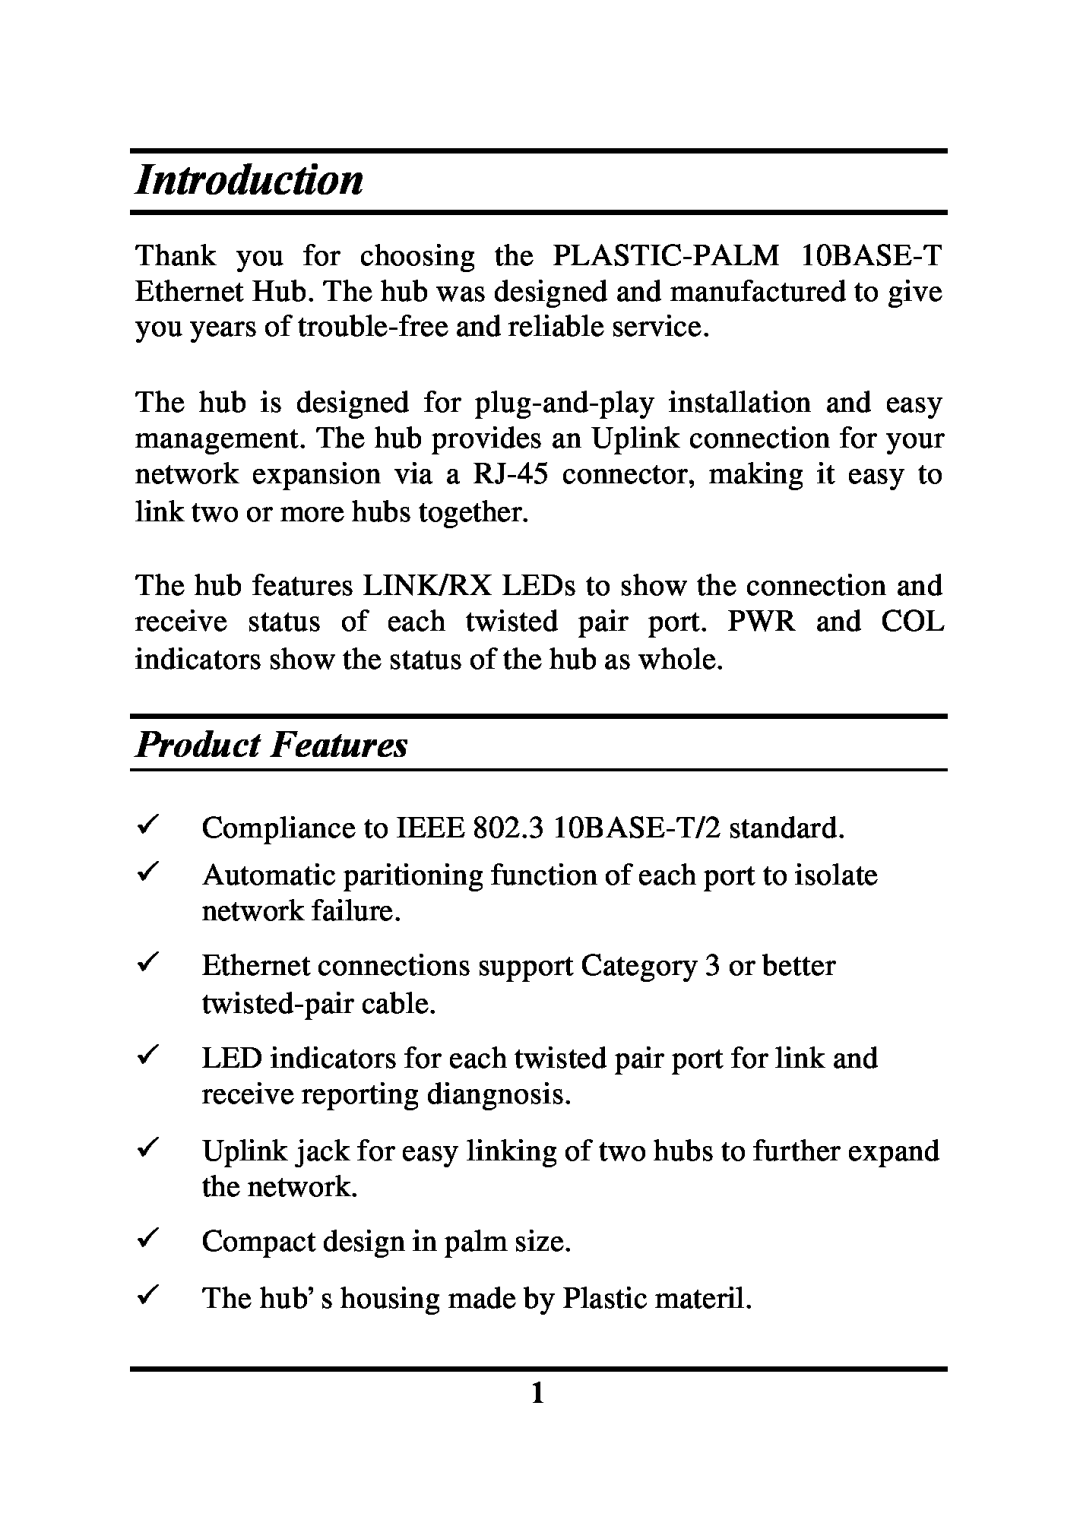 Palm ETHERNET HUB manual Introduction, Product Features 